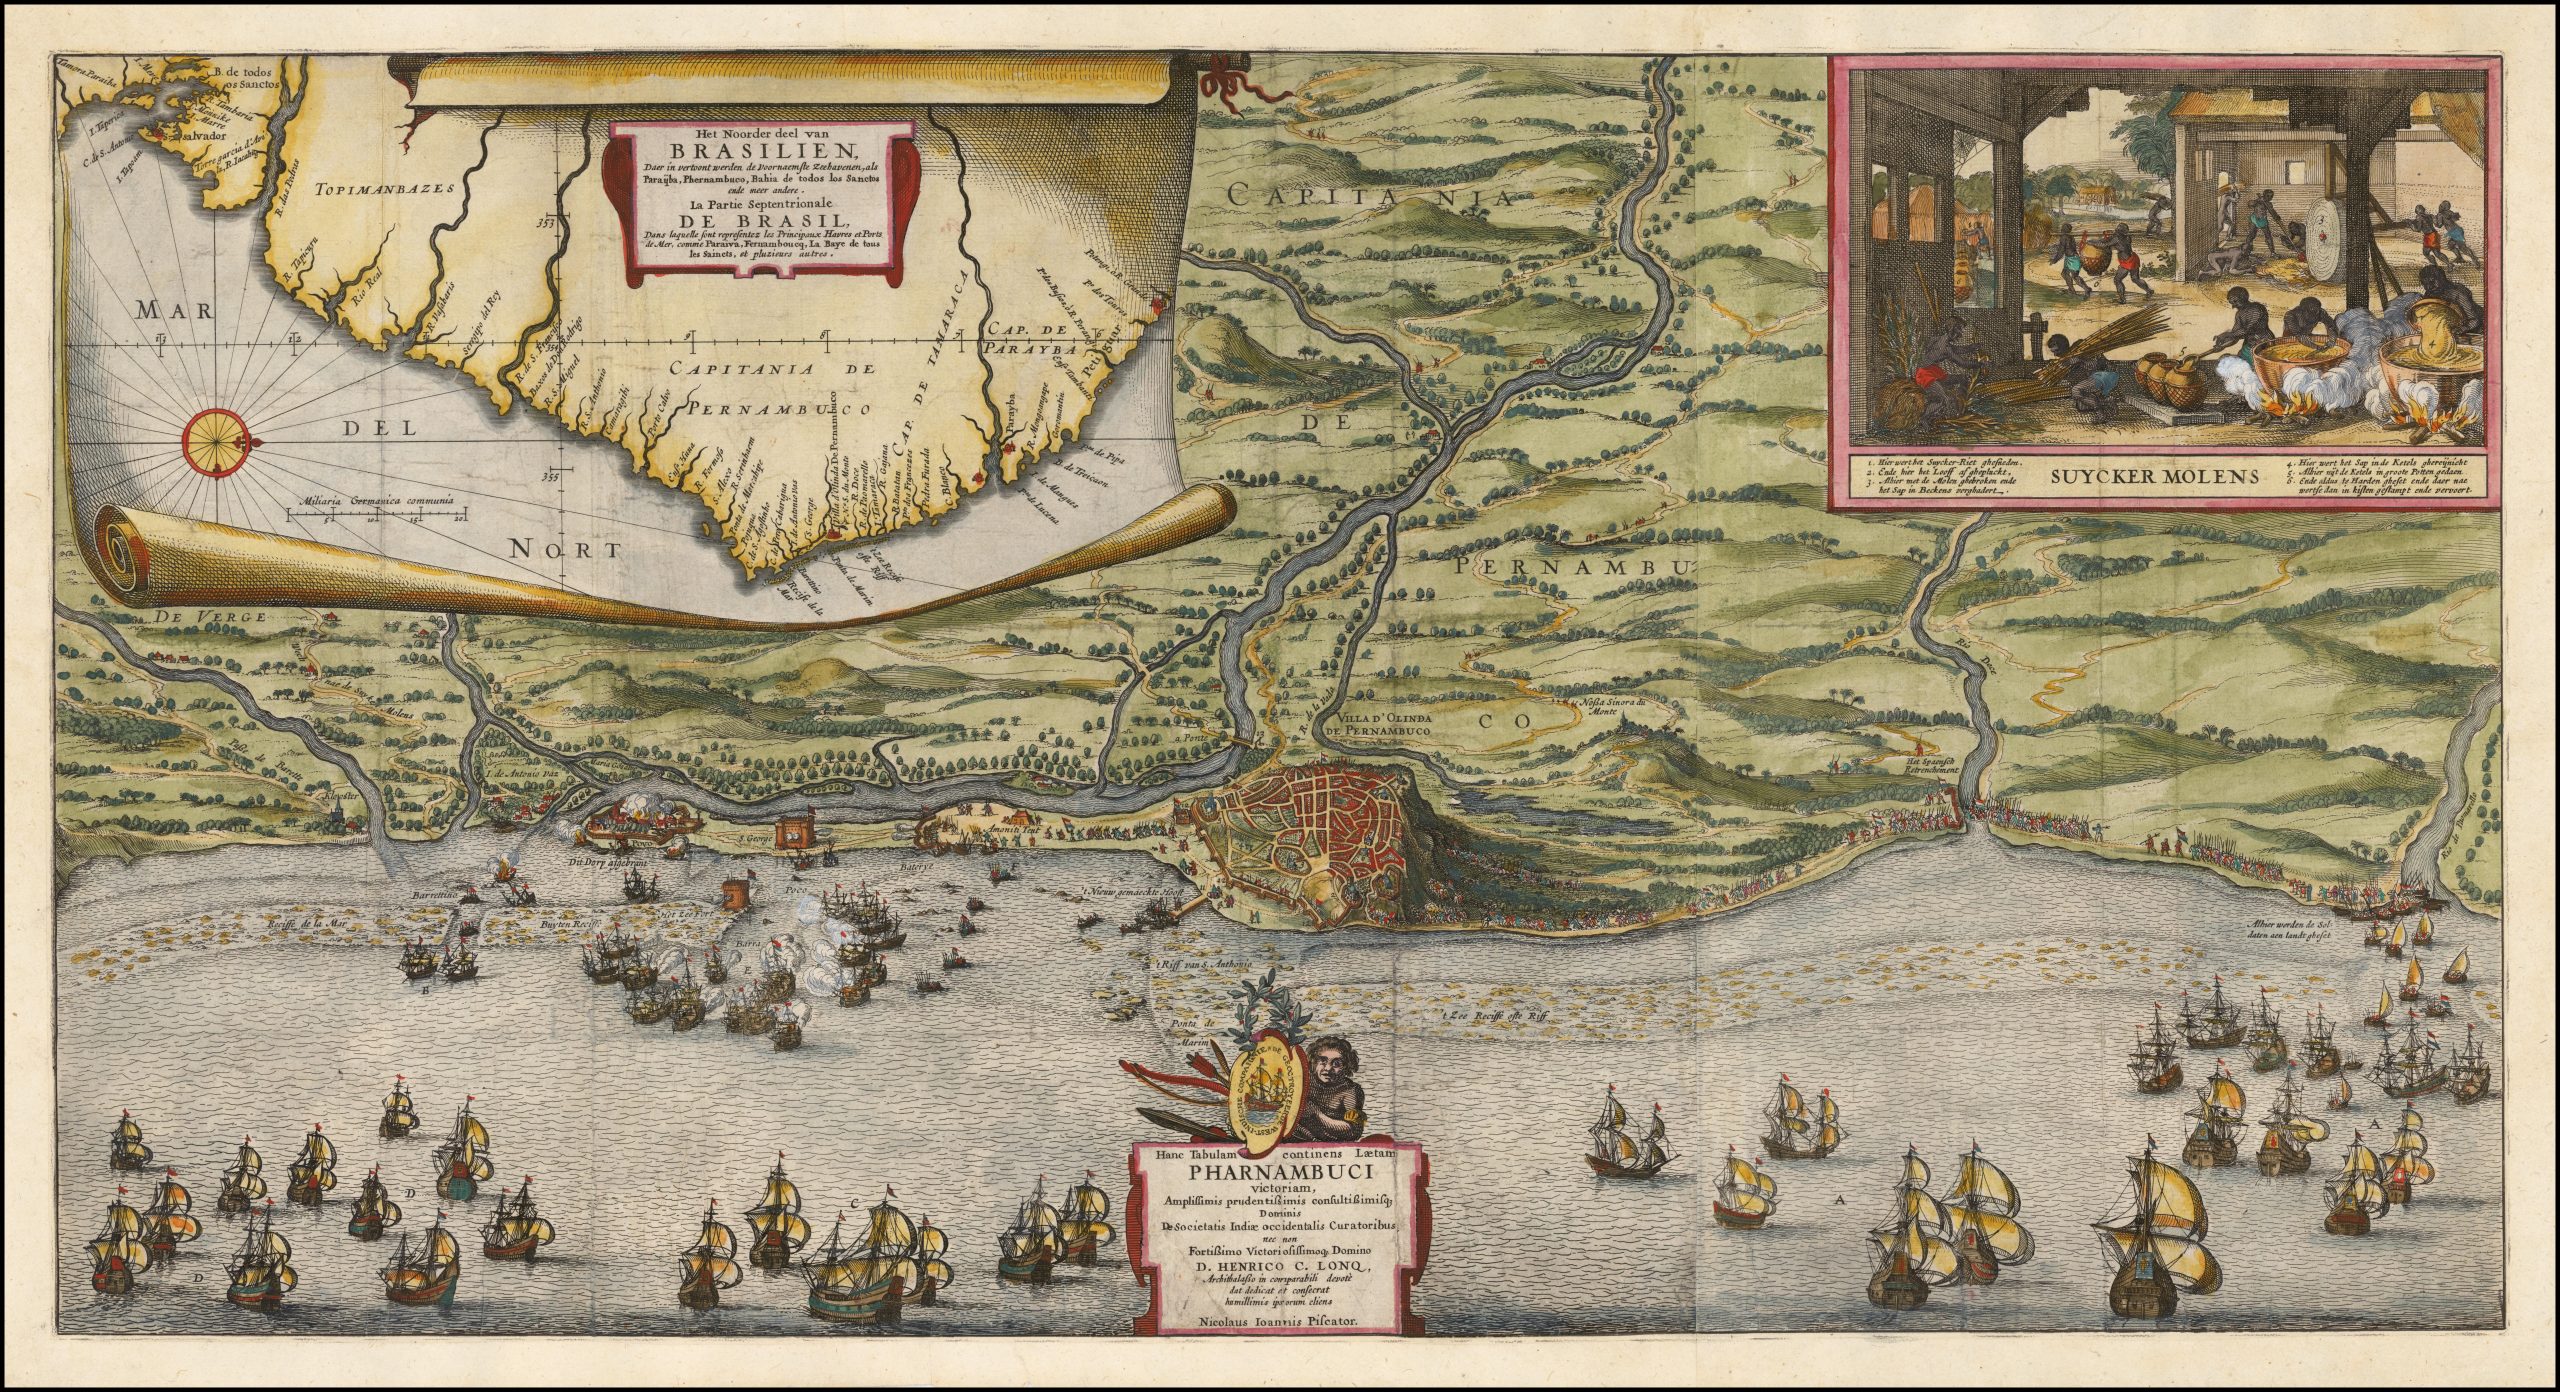 Rare broadside map celebrating the Dutch capture of the town of Olinda in Pernambuco by the Dutch West Indies Company in February 1630.Nicolaes Visscher, Public domain, via Wikimedia Commons